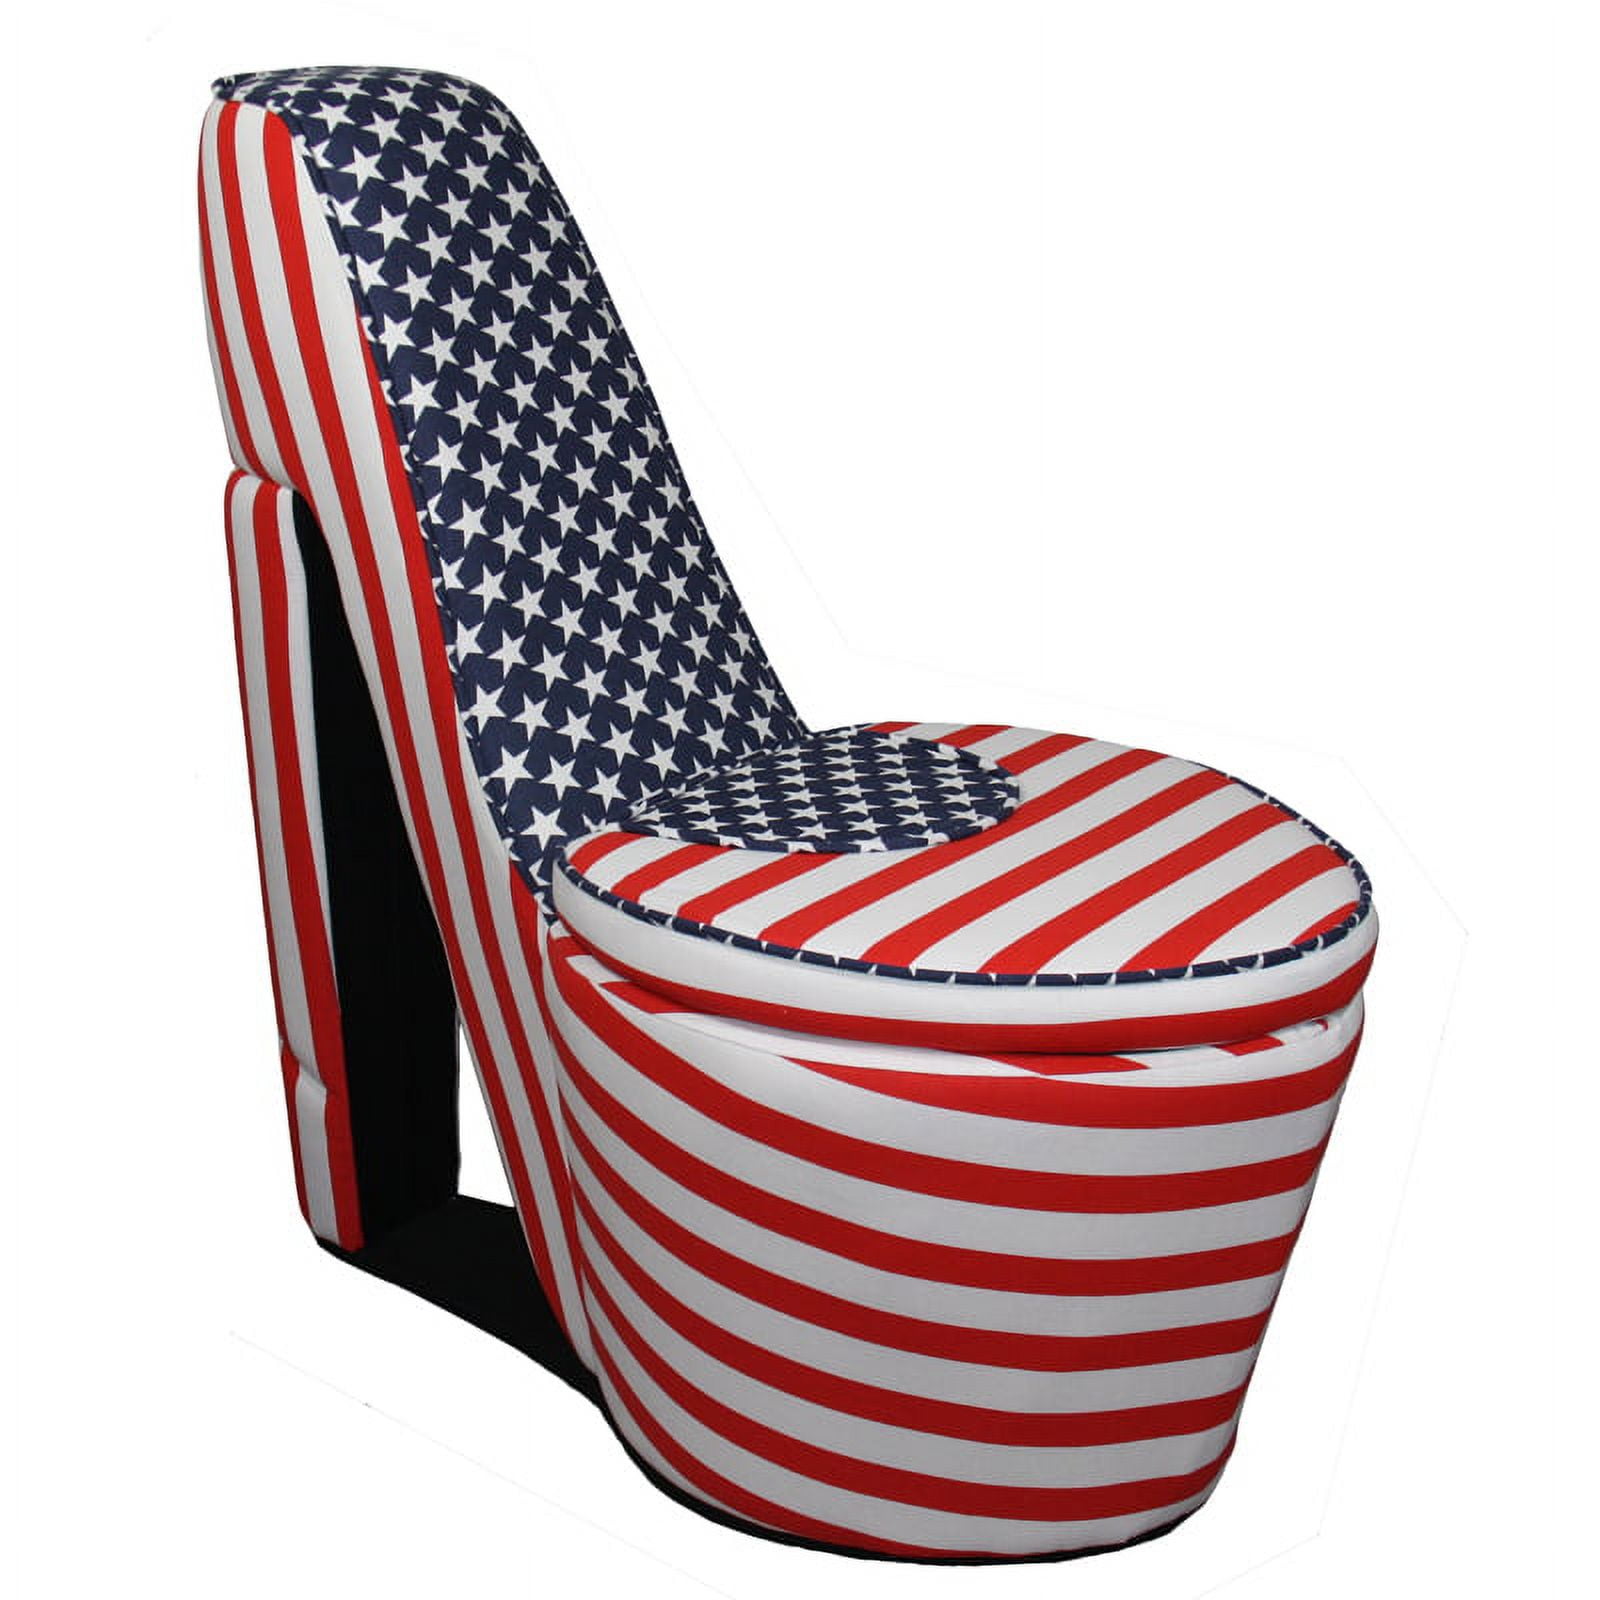 Picture of Benjara BM204211 Wooden High Heel Shaped Storage Chair with Flag Print - Multi Color - 32.86 x 32 x 16 in.